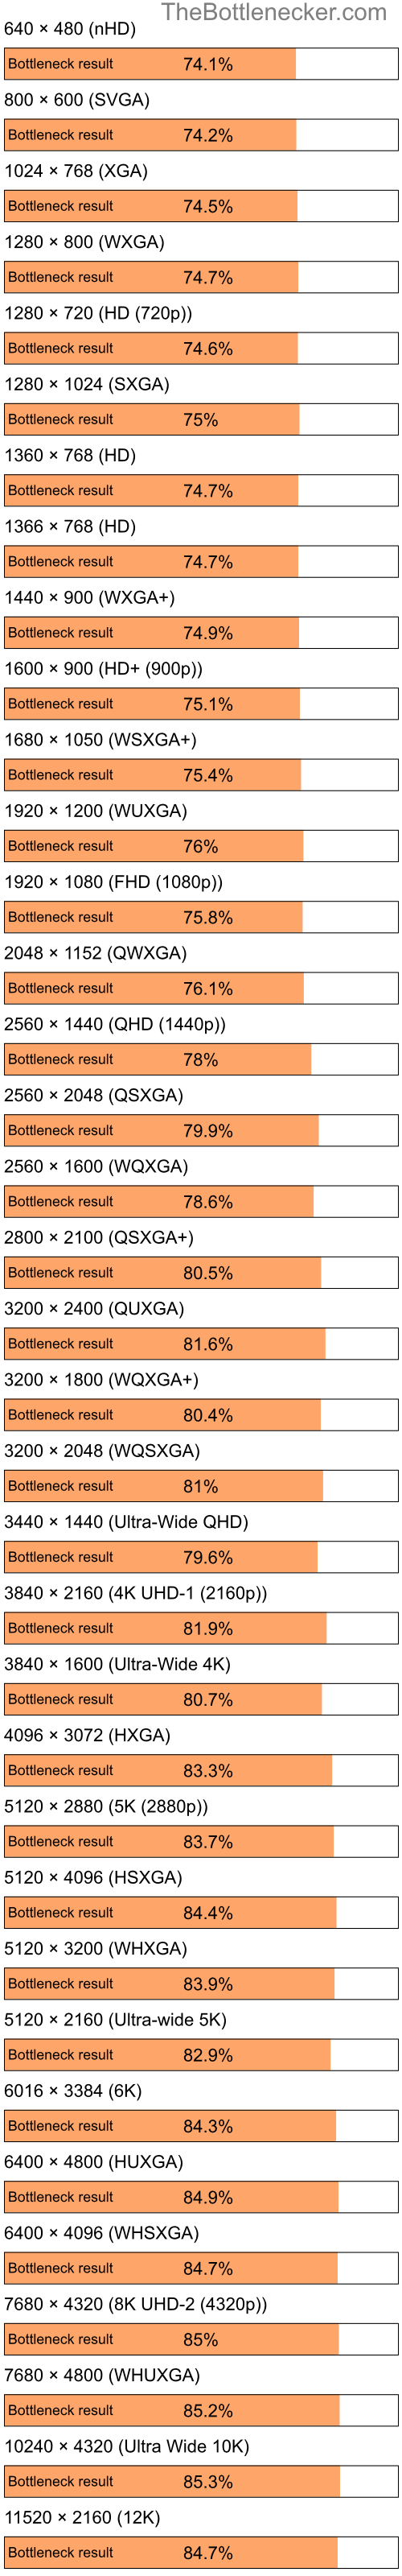 Bottleneck results by resolution for Intel Atom Z520 and AMD Radeon X800 XL in Graphic Card Intense Tasks